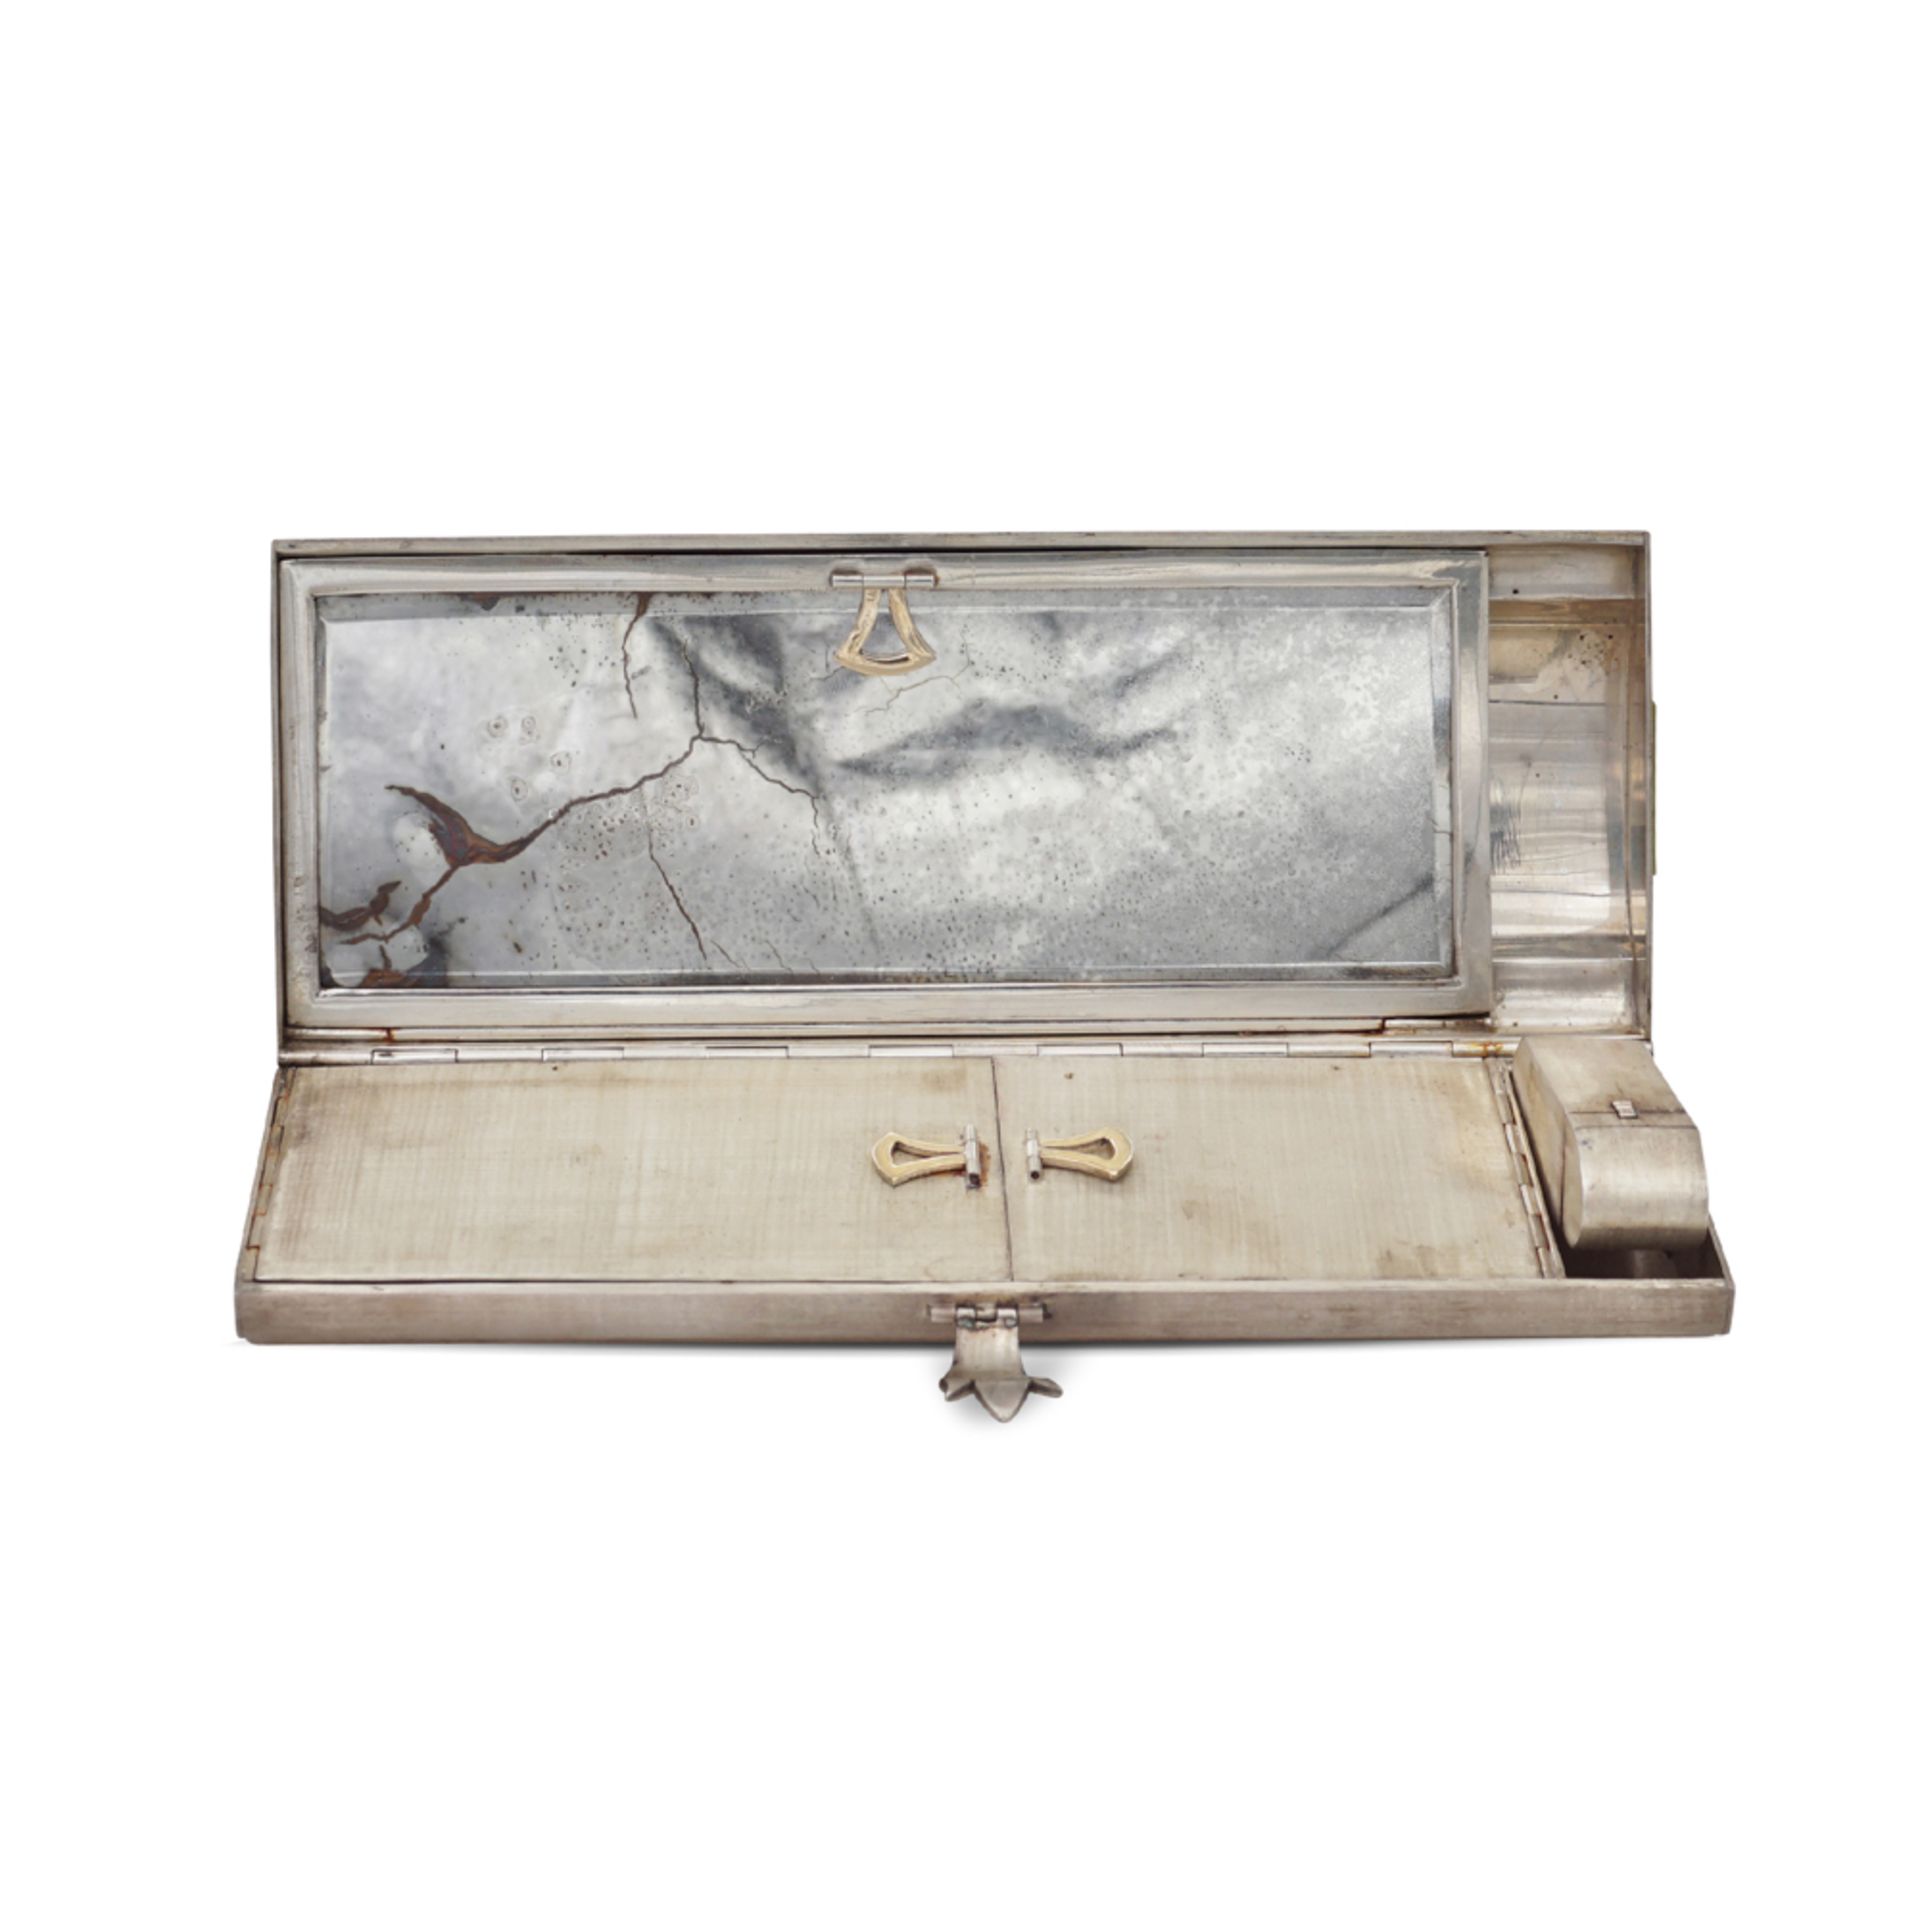 Satin silver trousse Italy, 20th century 3,5x17x6,5 cm. rectangular shape, three compartments - Image 2 of 2